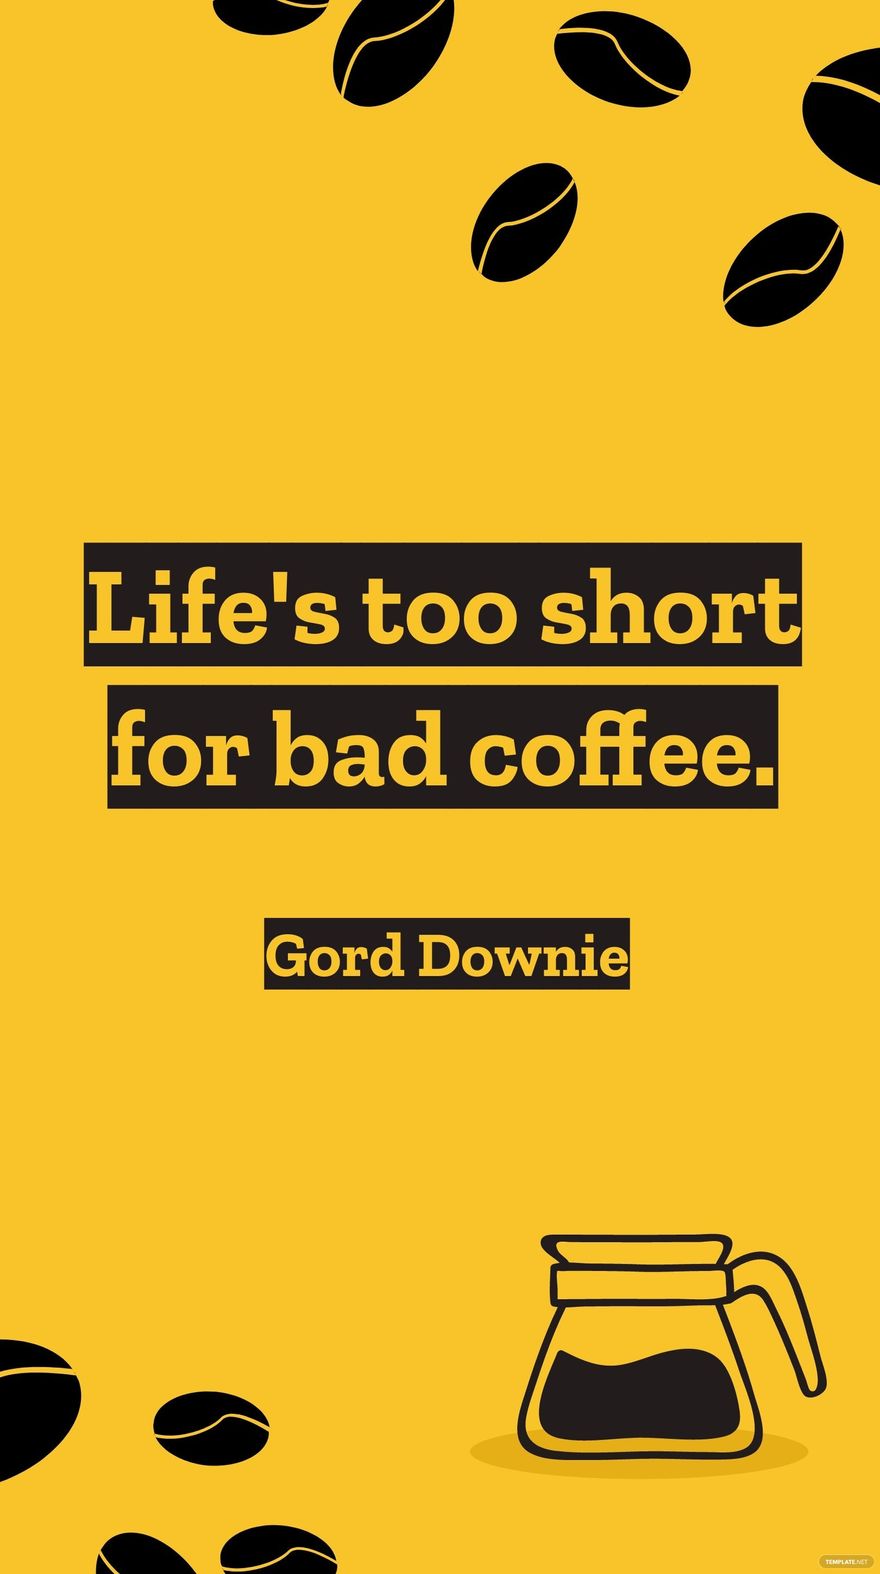 Gord Downie - Life's too short for bad coffee.